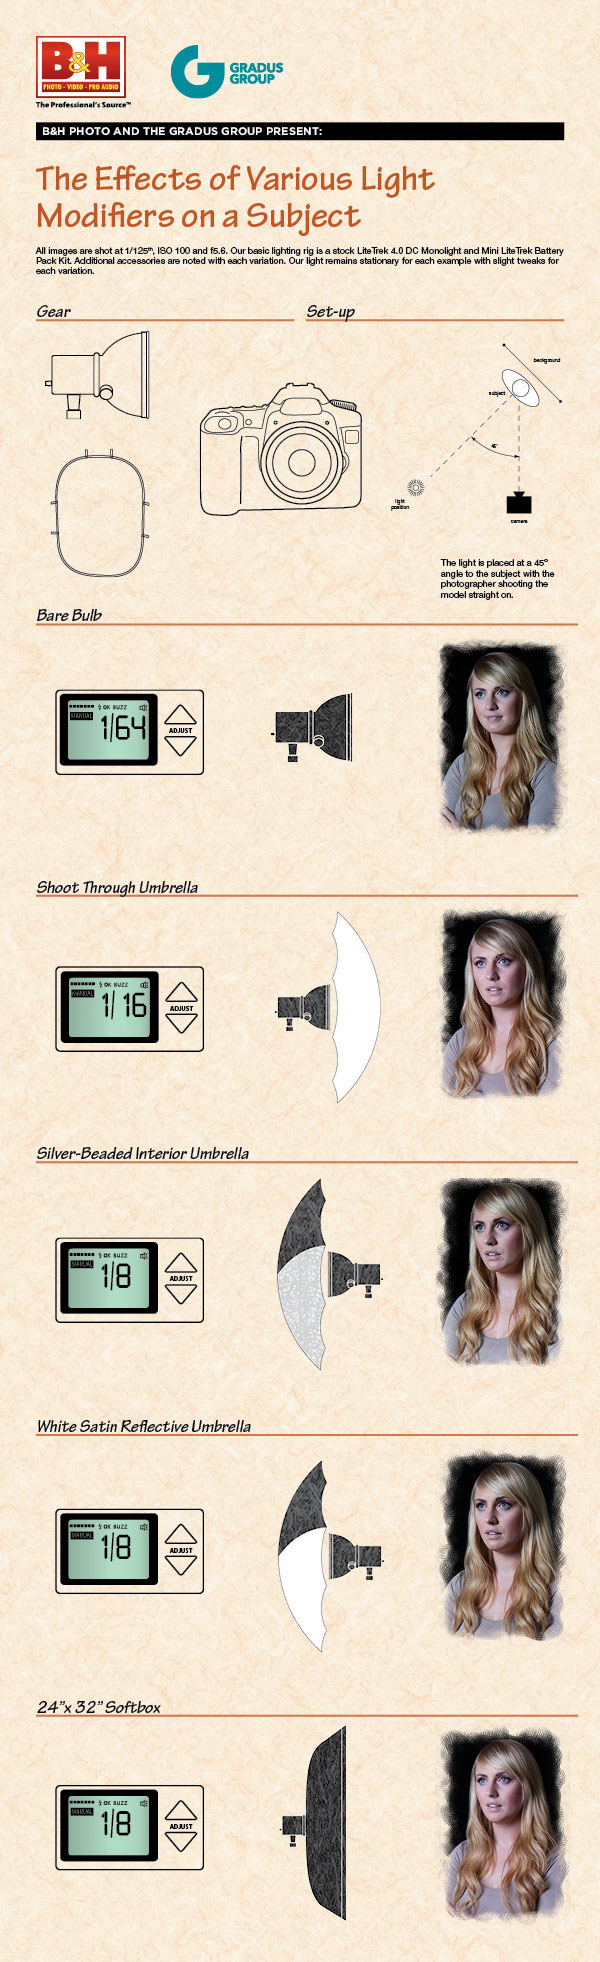 B&H's nifty lighting modifiers infographic.